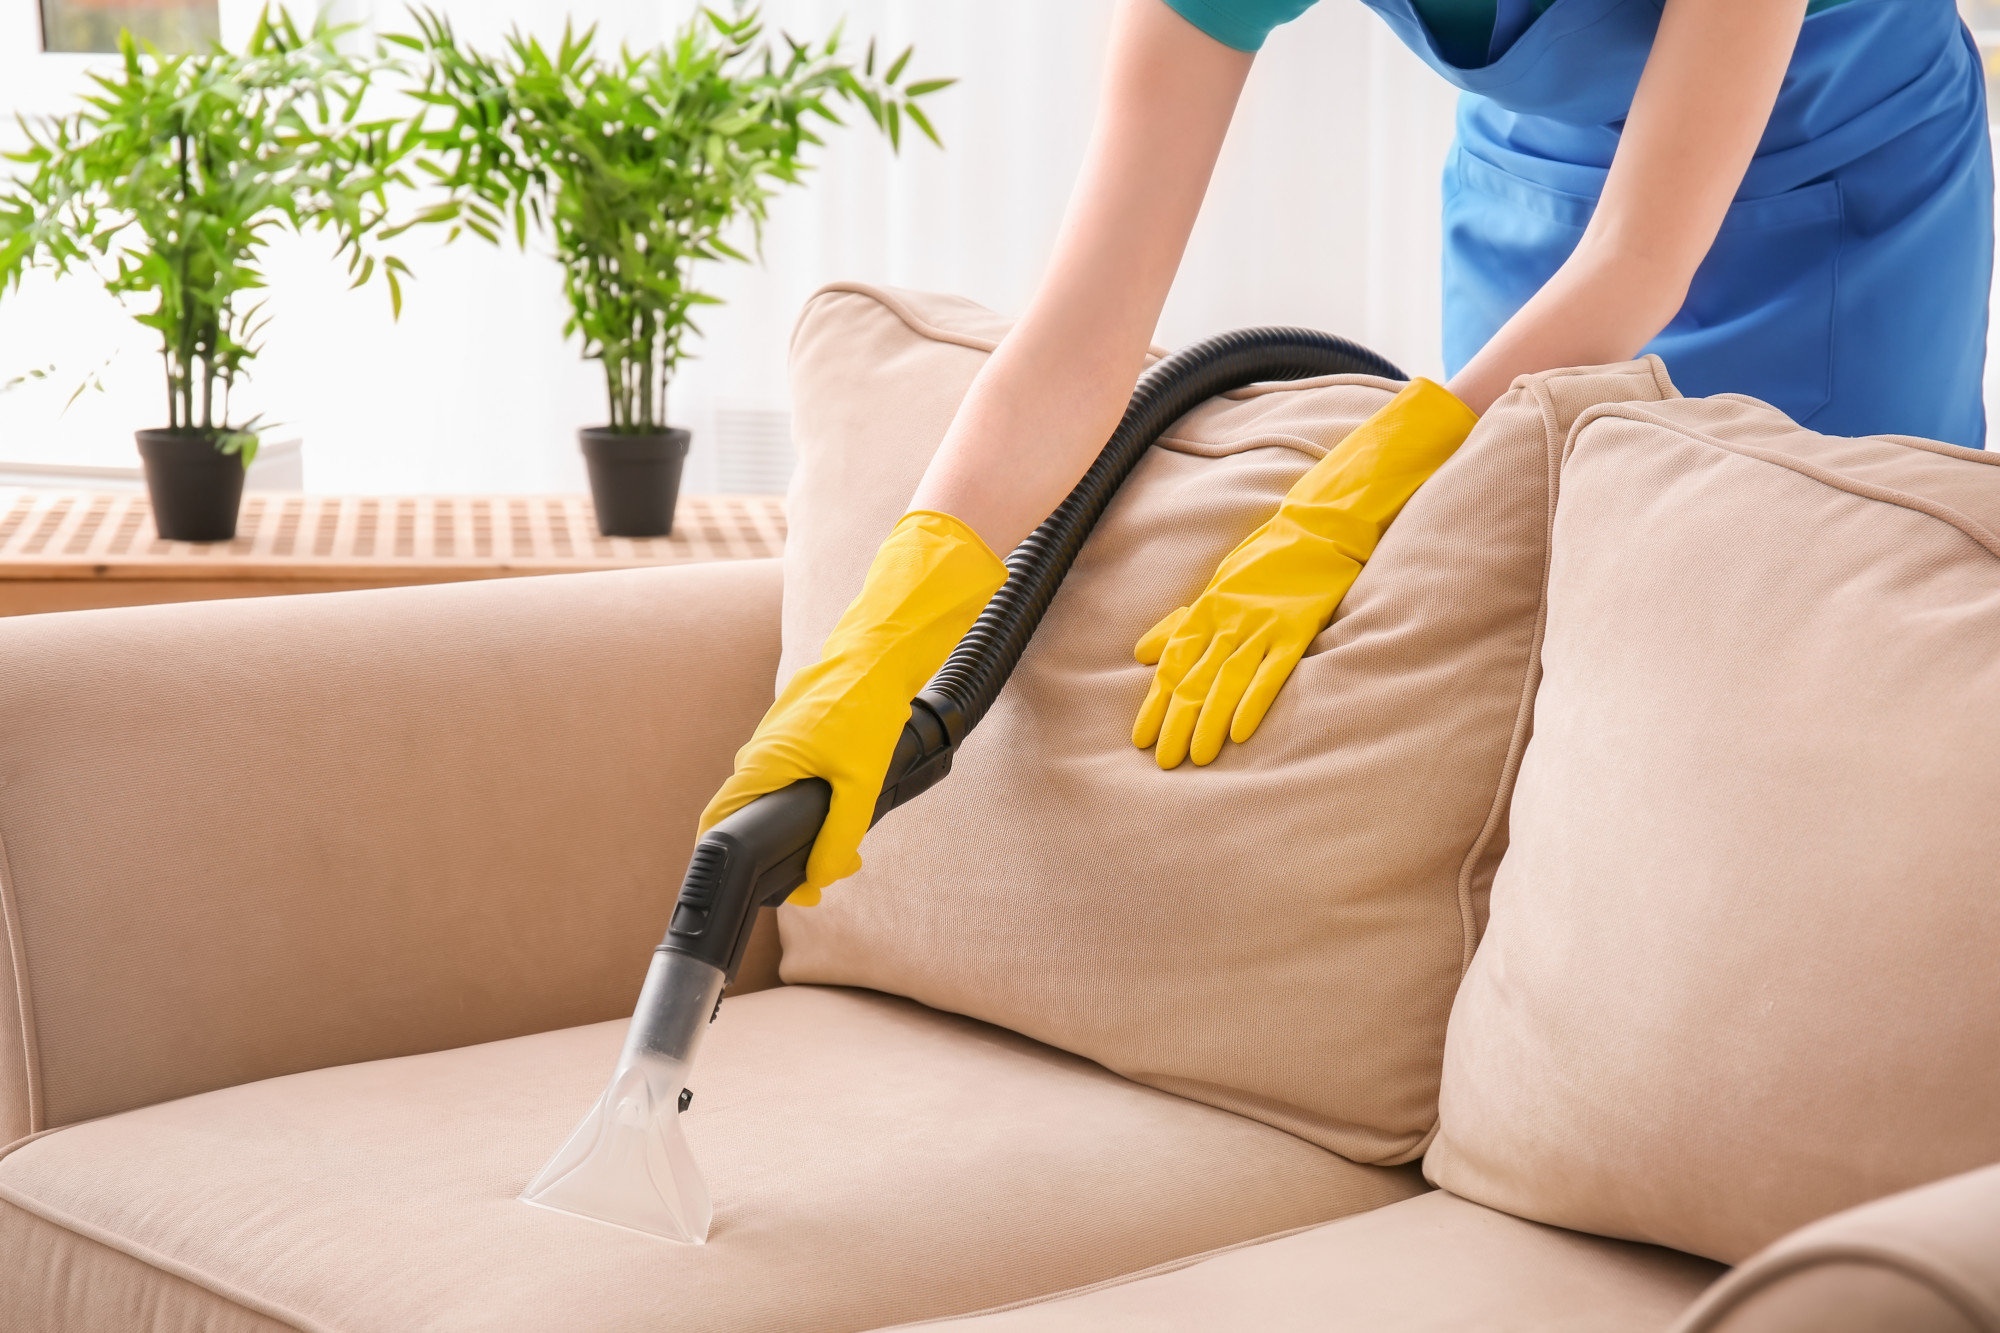 How To Clean A Smelly Couch, How To Clean Cushions On Chairs